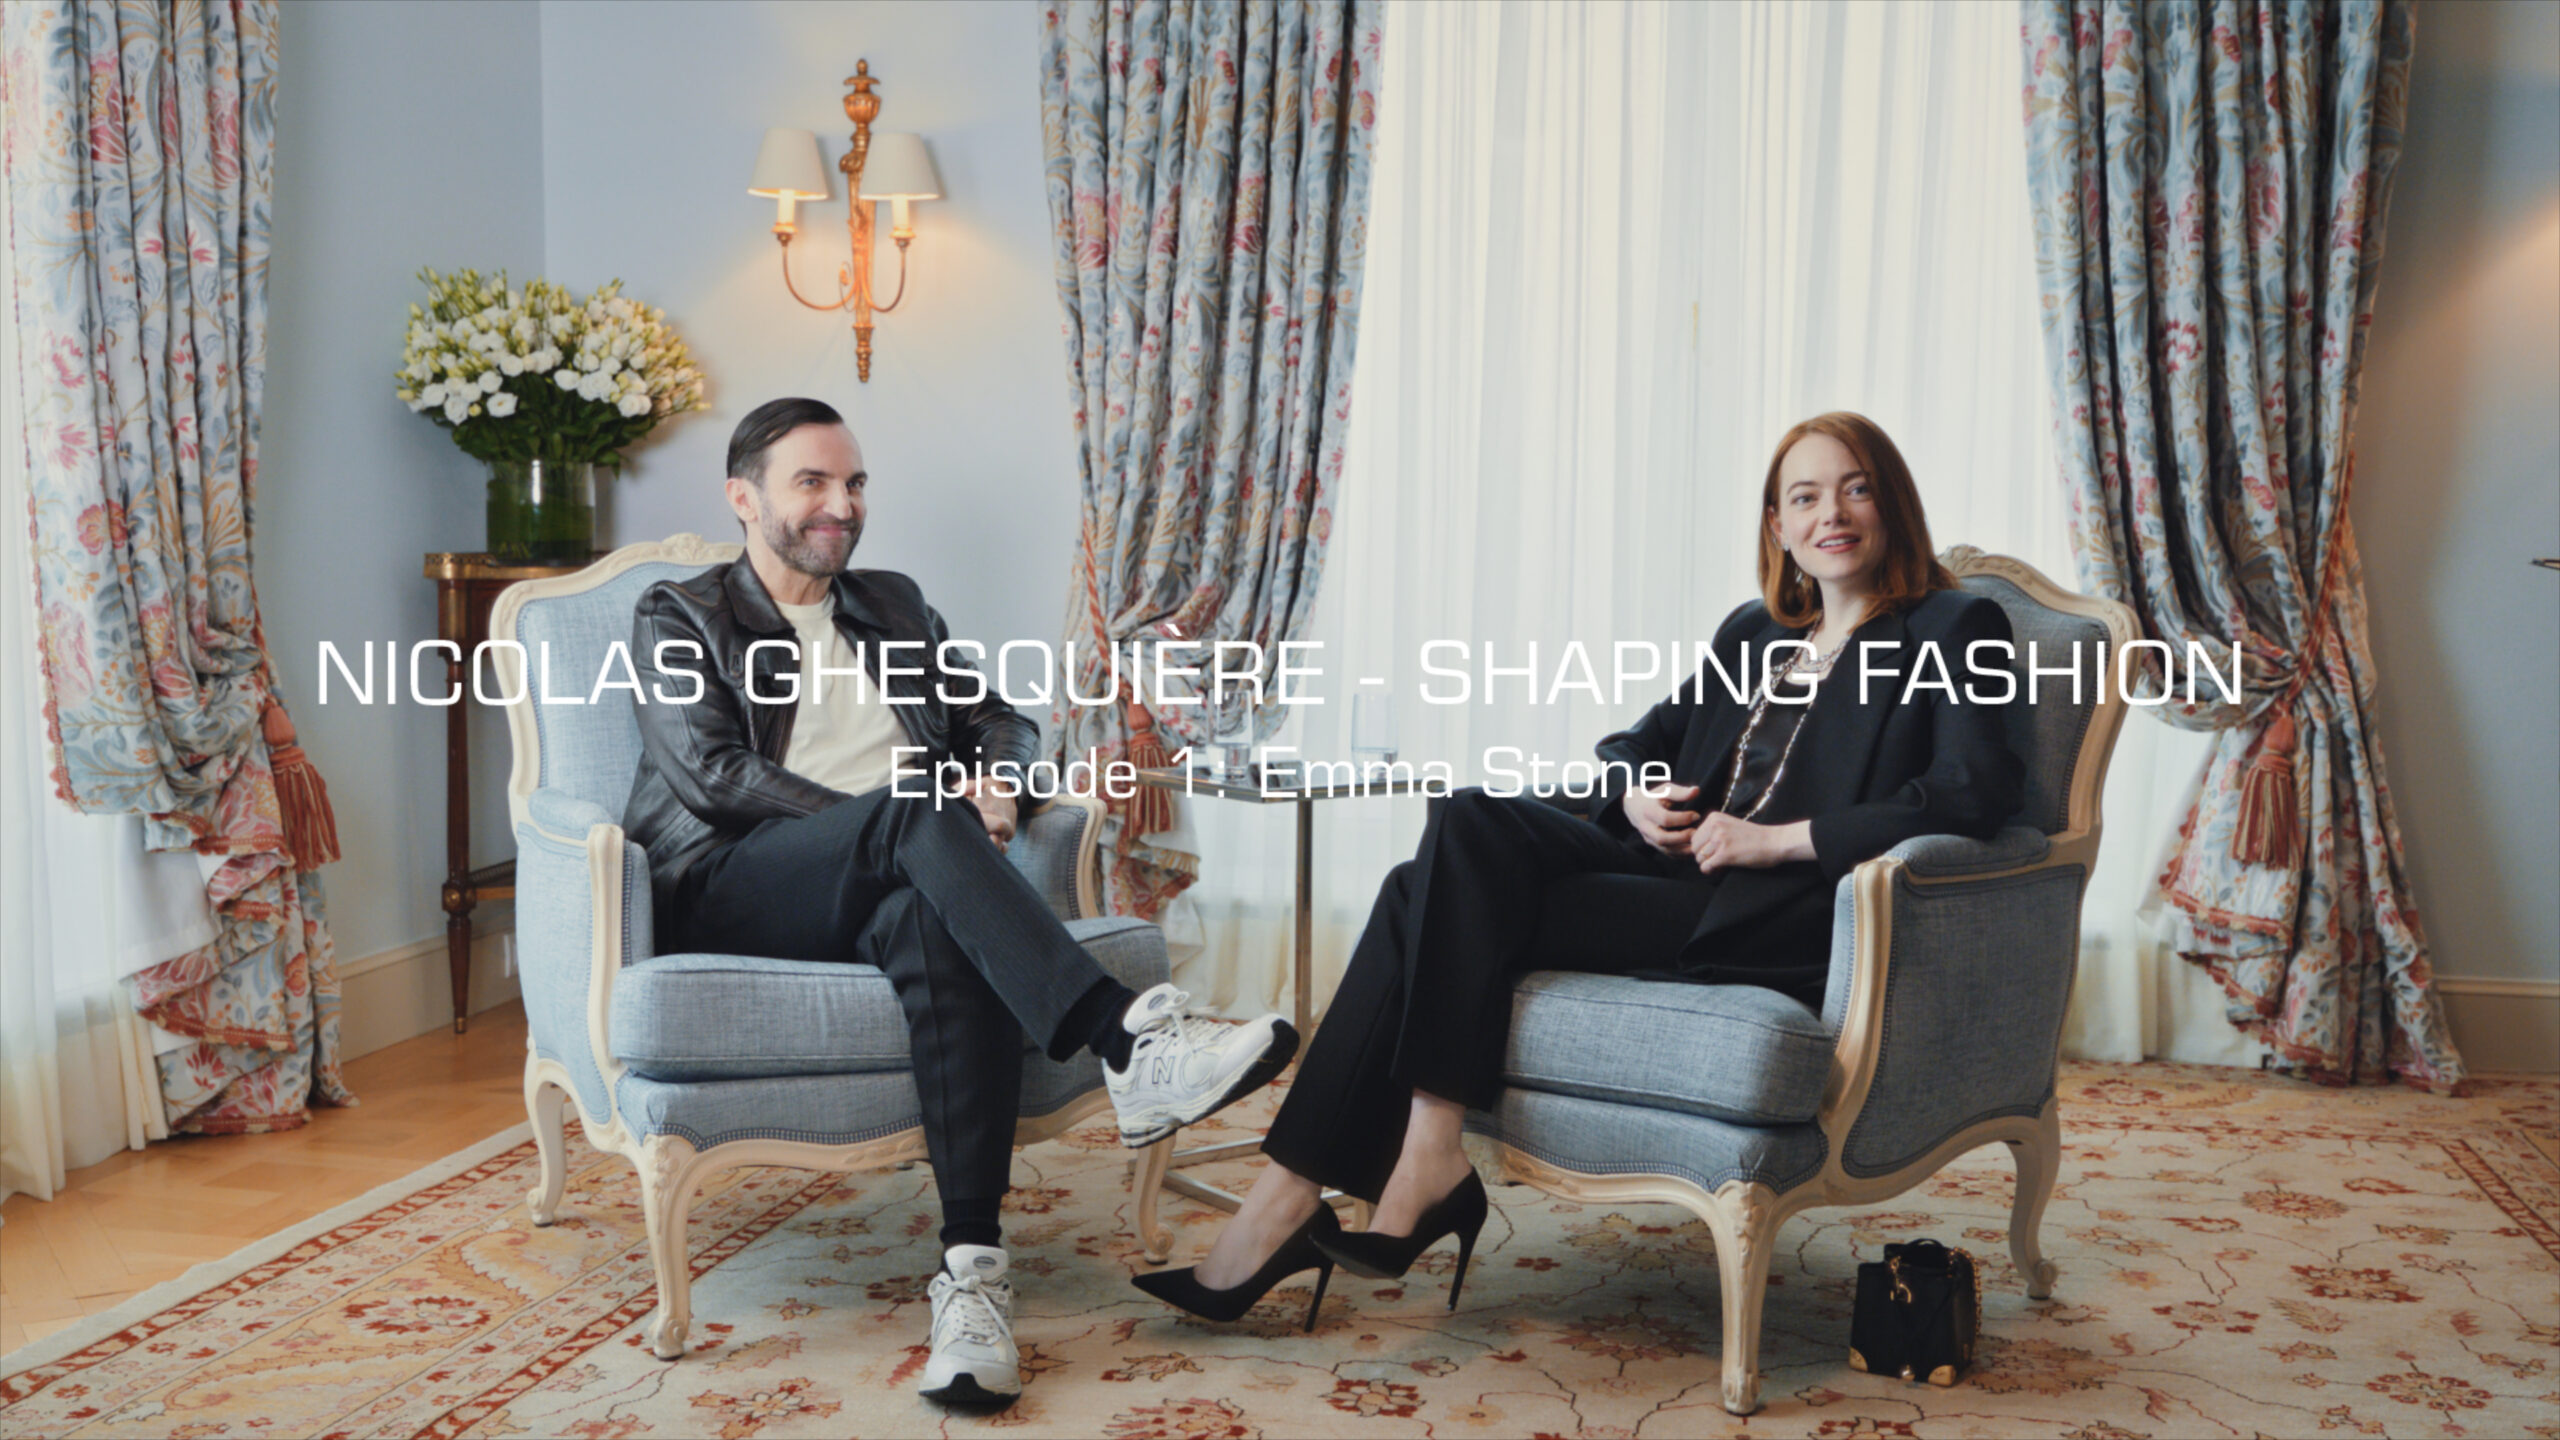 Nicolas Ghesquière and Emma Stone seated in an opulent room, engaged in conversation for the YouTube series 'Nicolas Ghesquière - Shaping Fashion'.